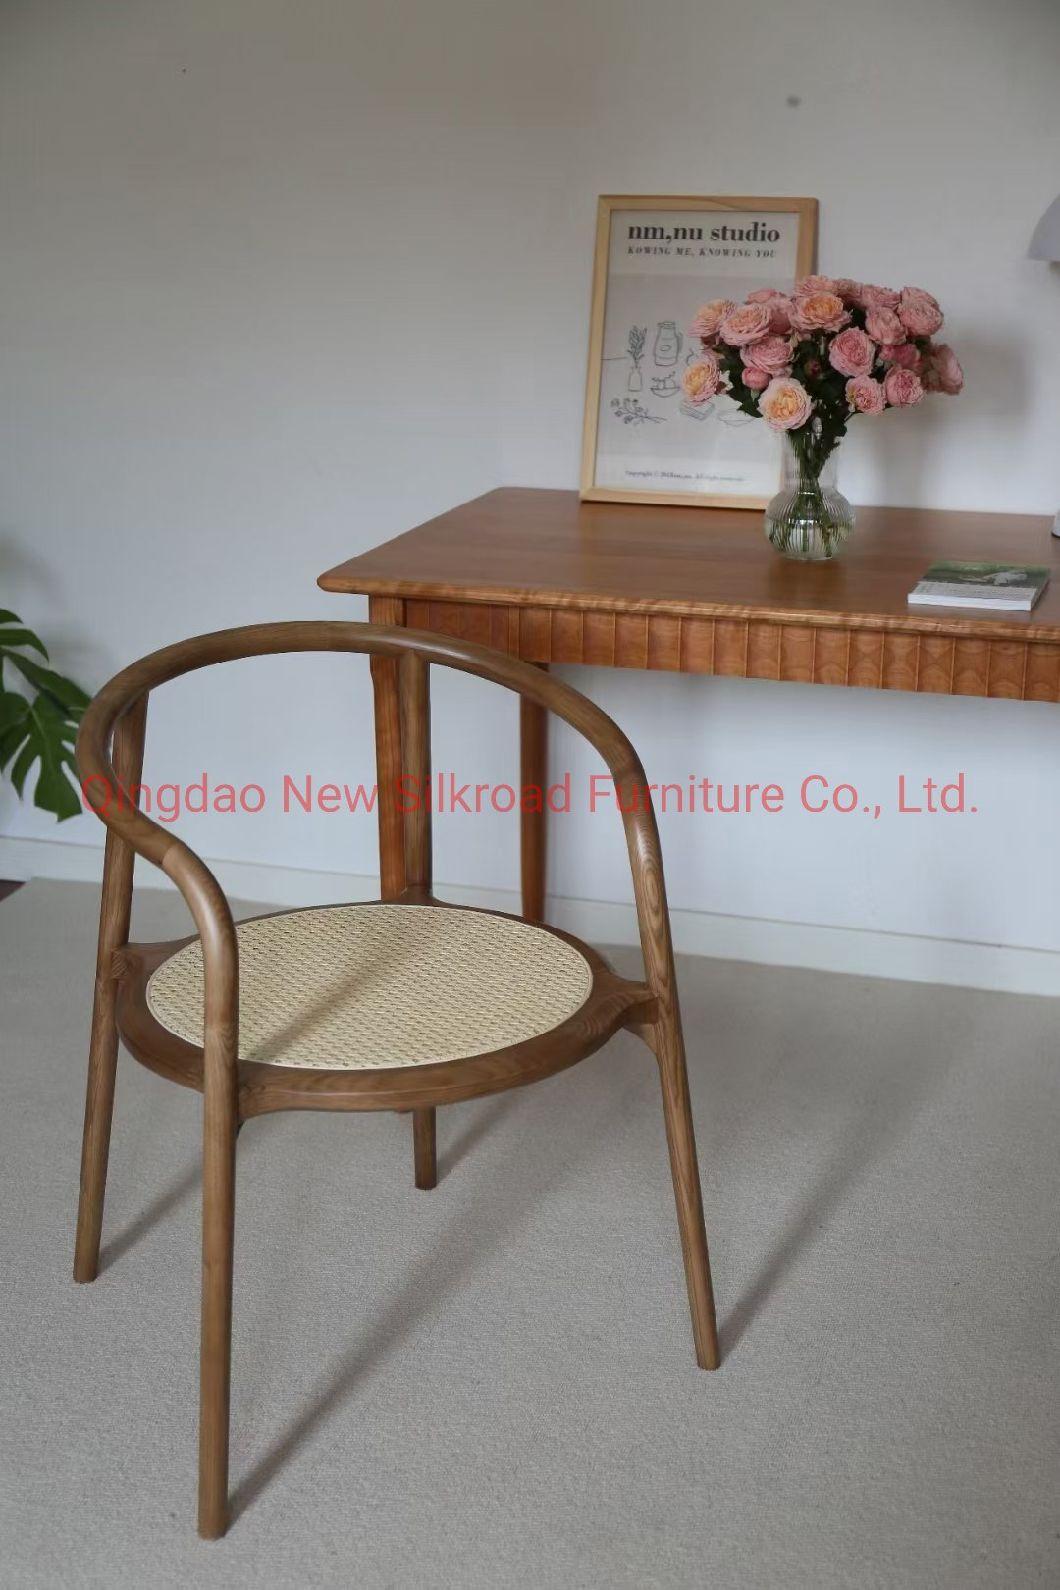 Factory Price Wholesale Modern Furniture Solid Oak/Elm Wooden Wedding Chair Banquet Chair Bent Wood Restaurant Dining Chair for Dining Room Furniture